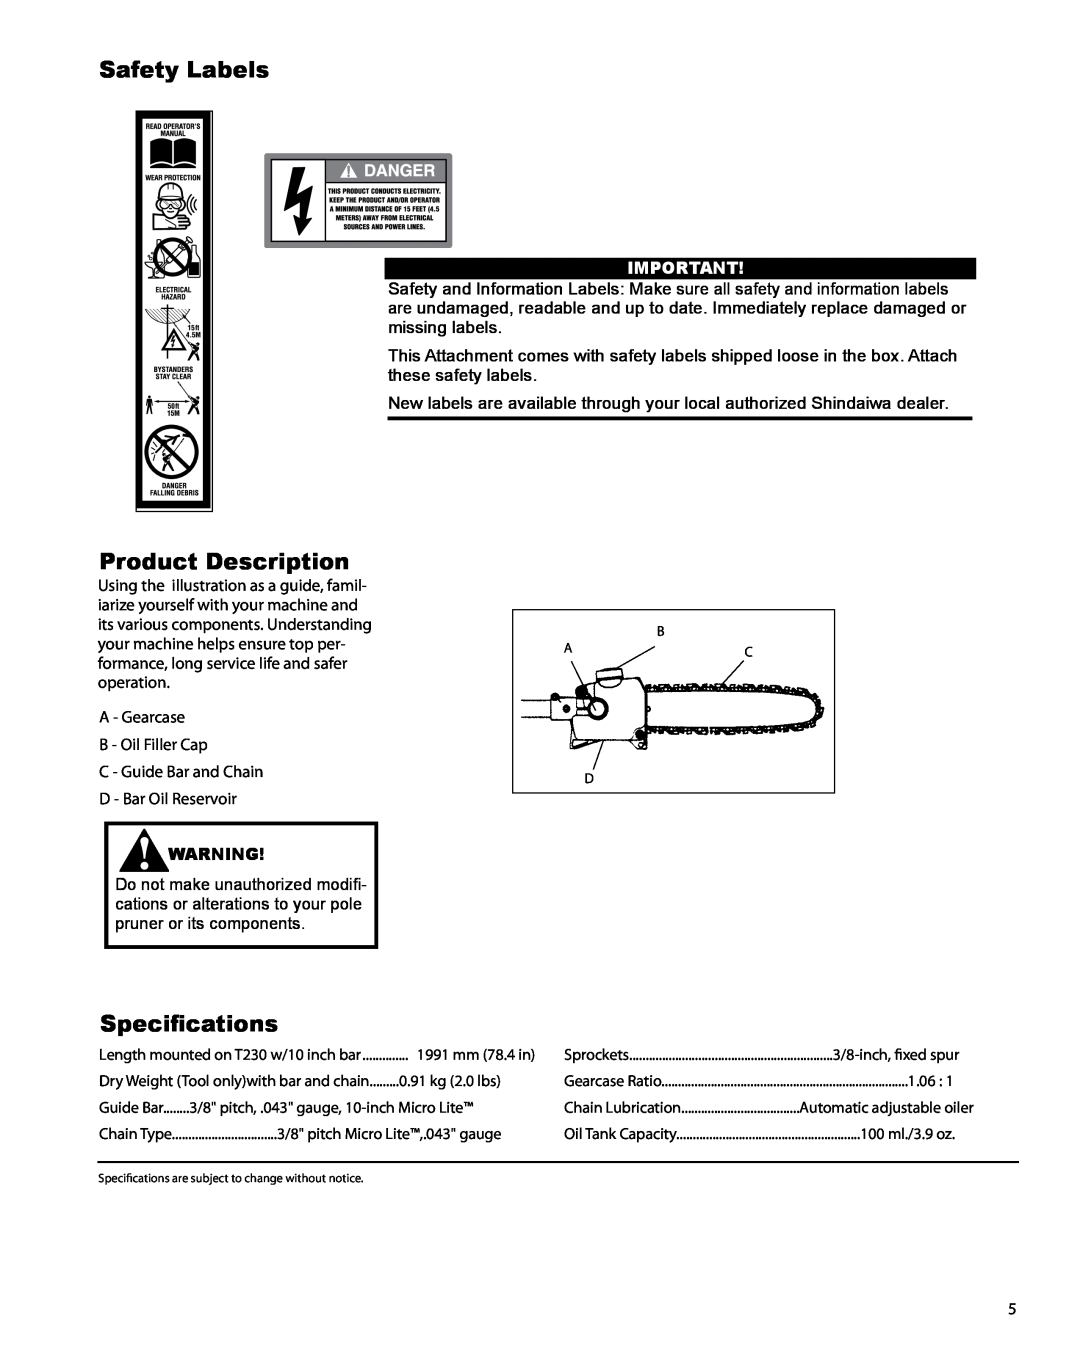 Shindaiwa T230 manual Safety Labels, Product Description, Specifications 